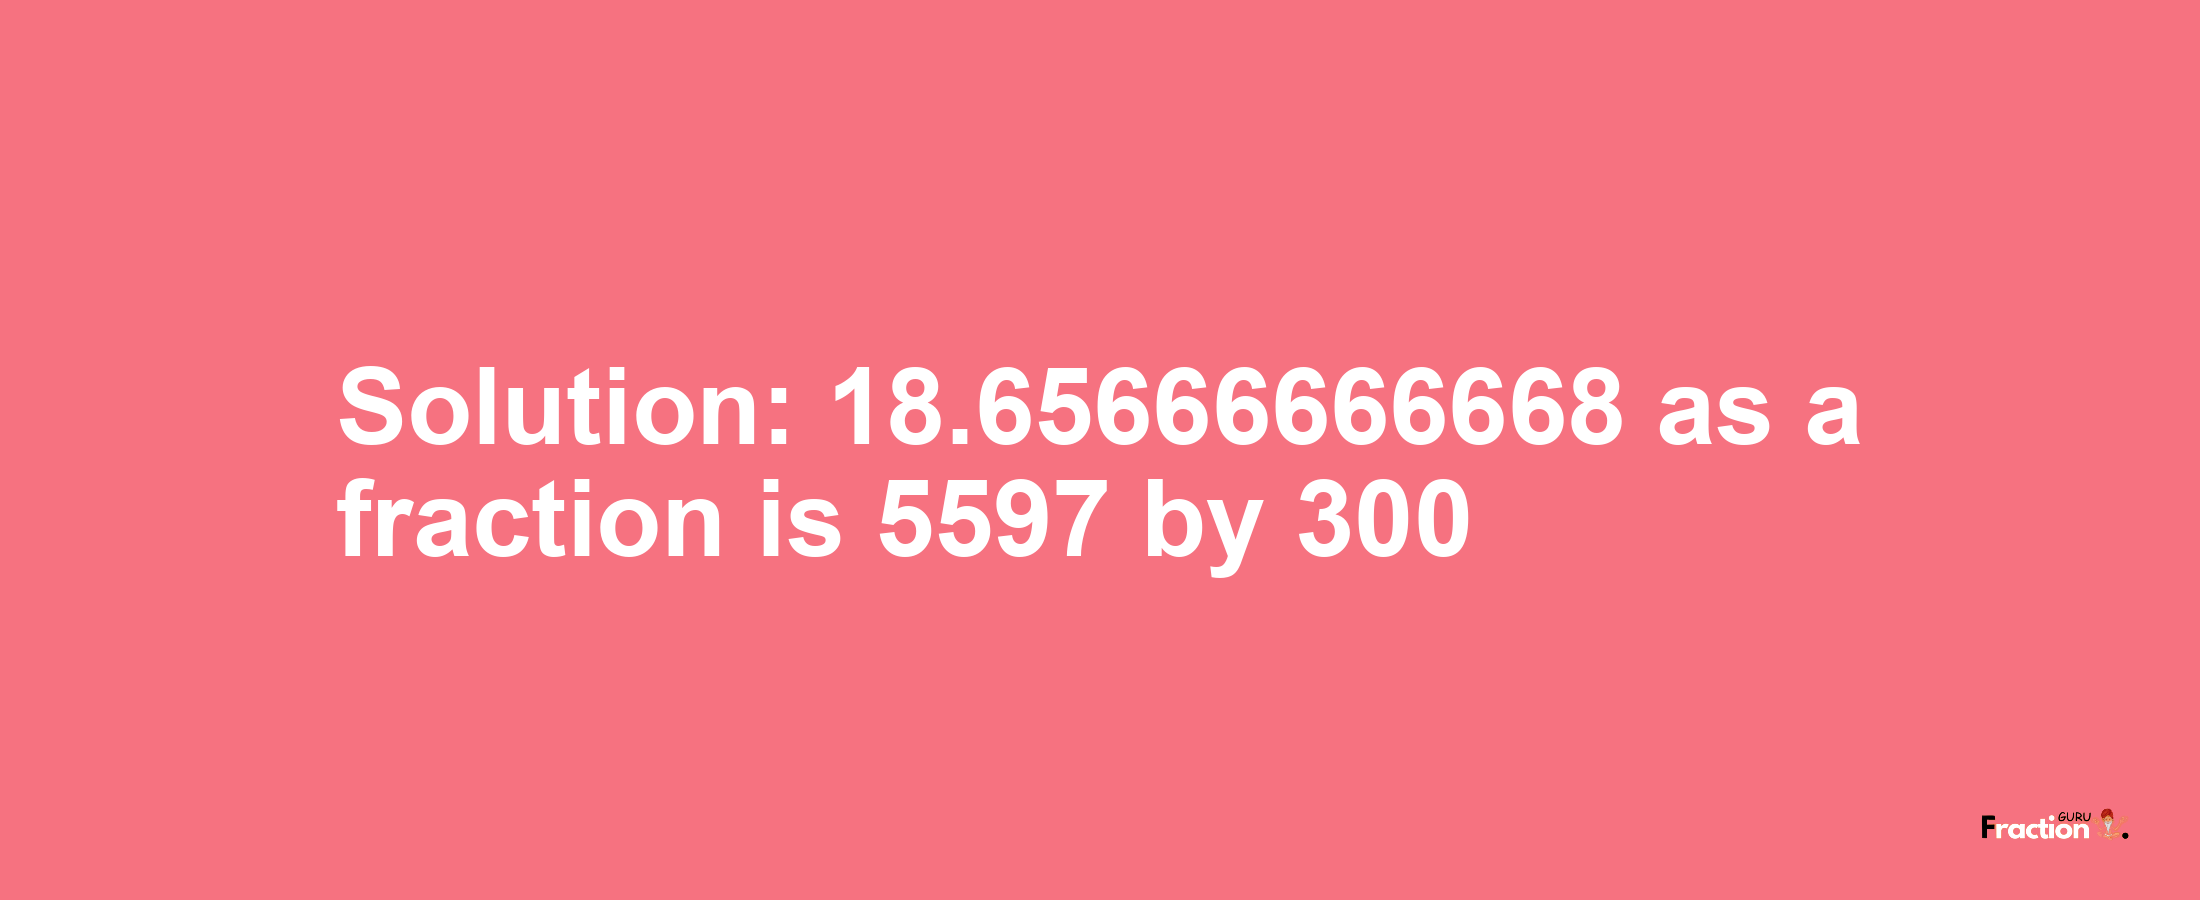 Solution:18.65666666668 as a fraction is 5597/300